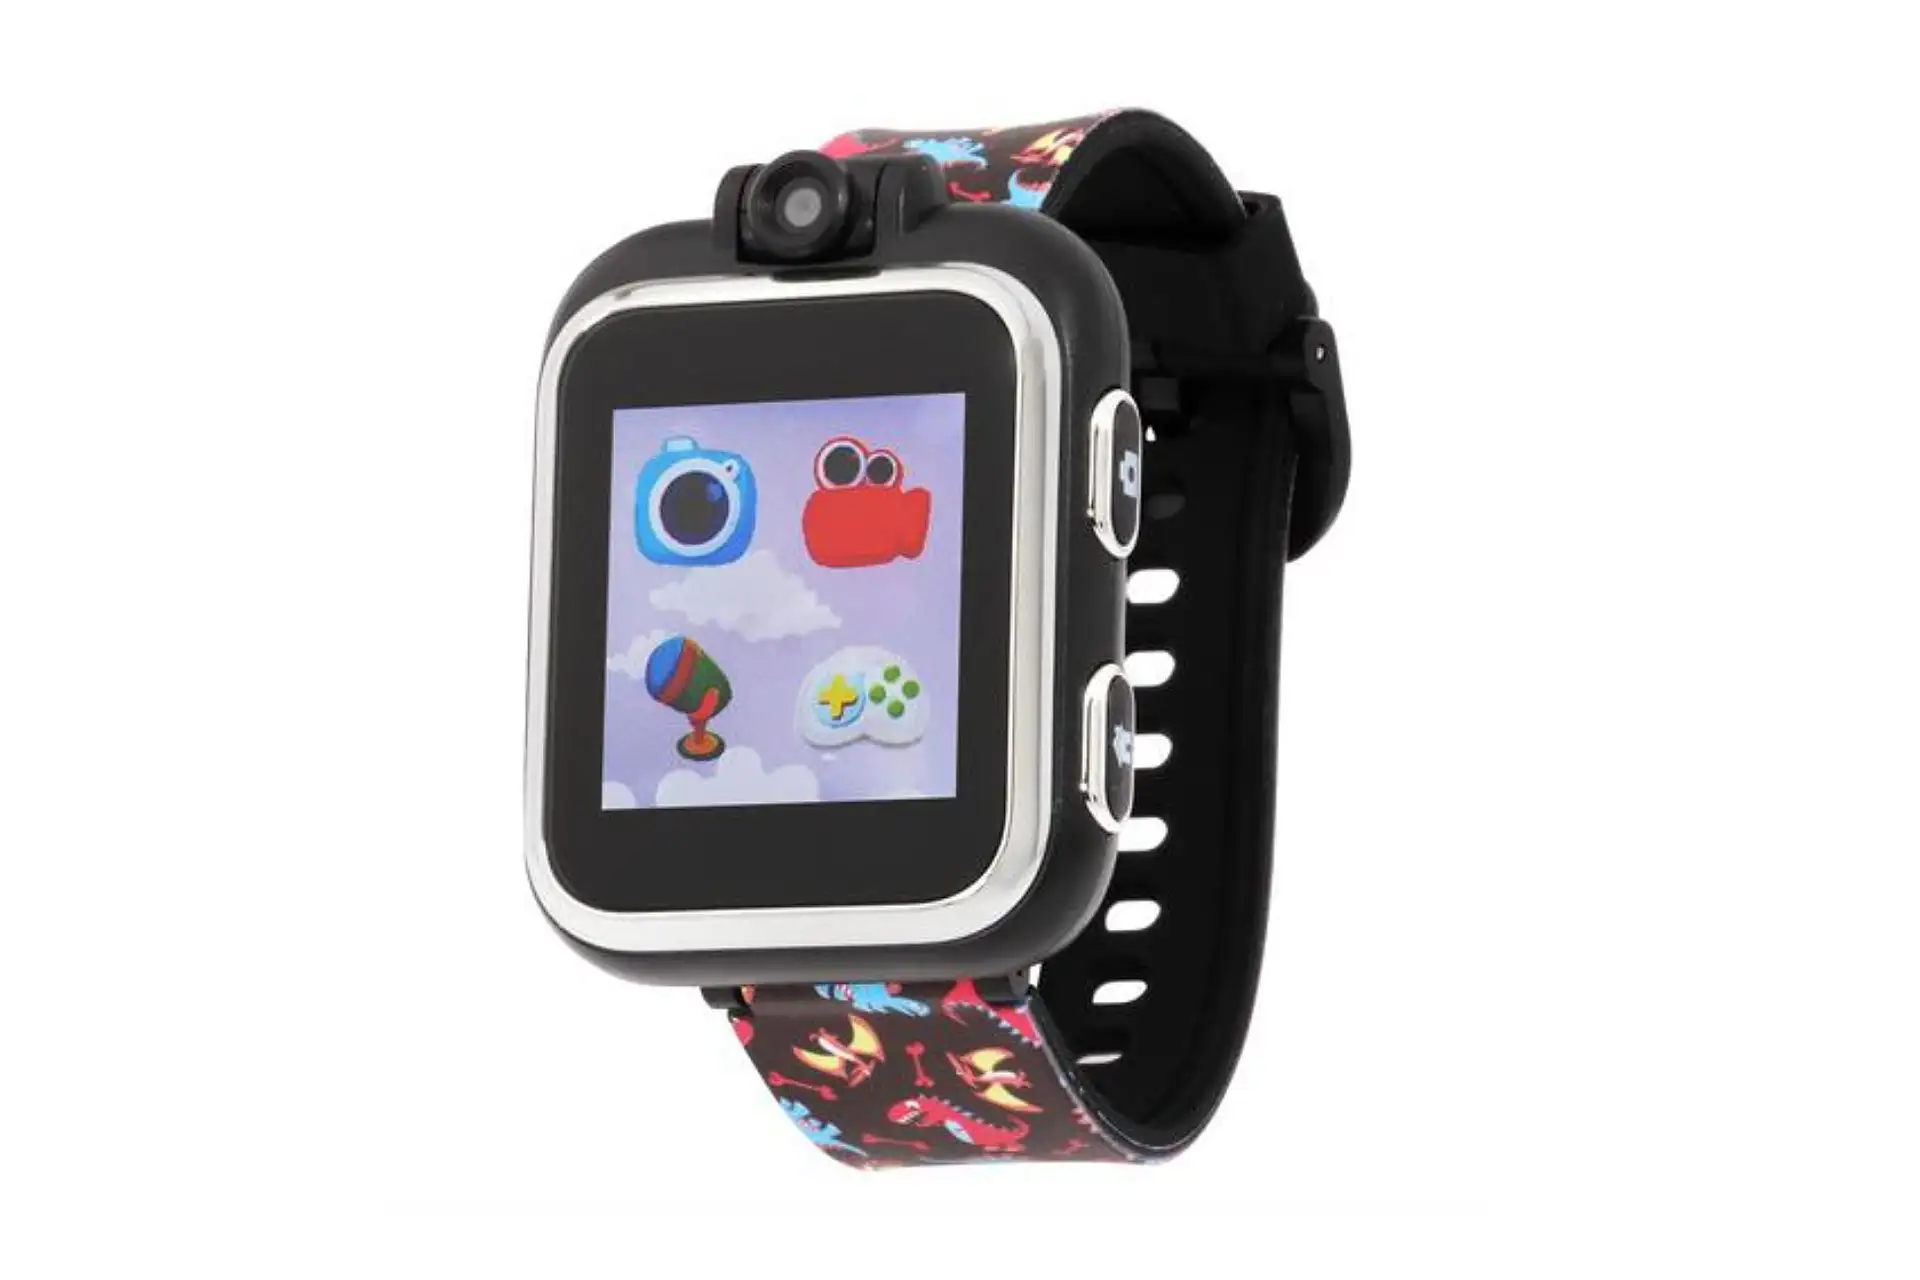 iTouch Air Smart Watch; Courtesy of Amazon